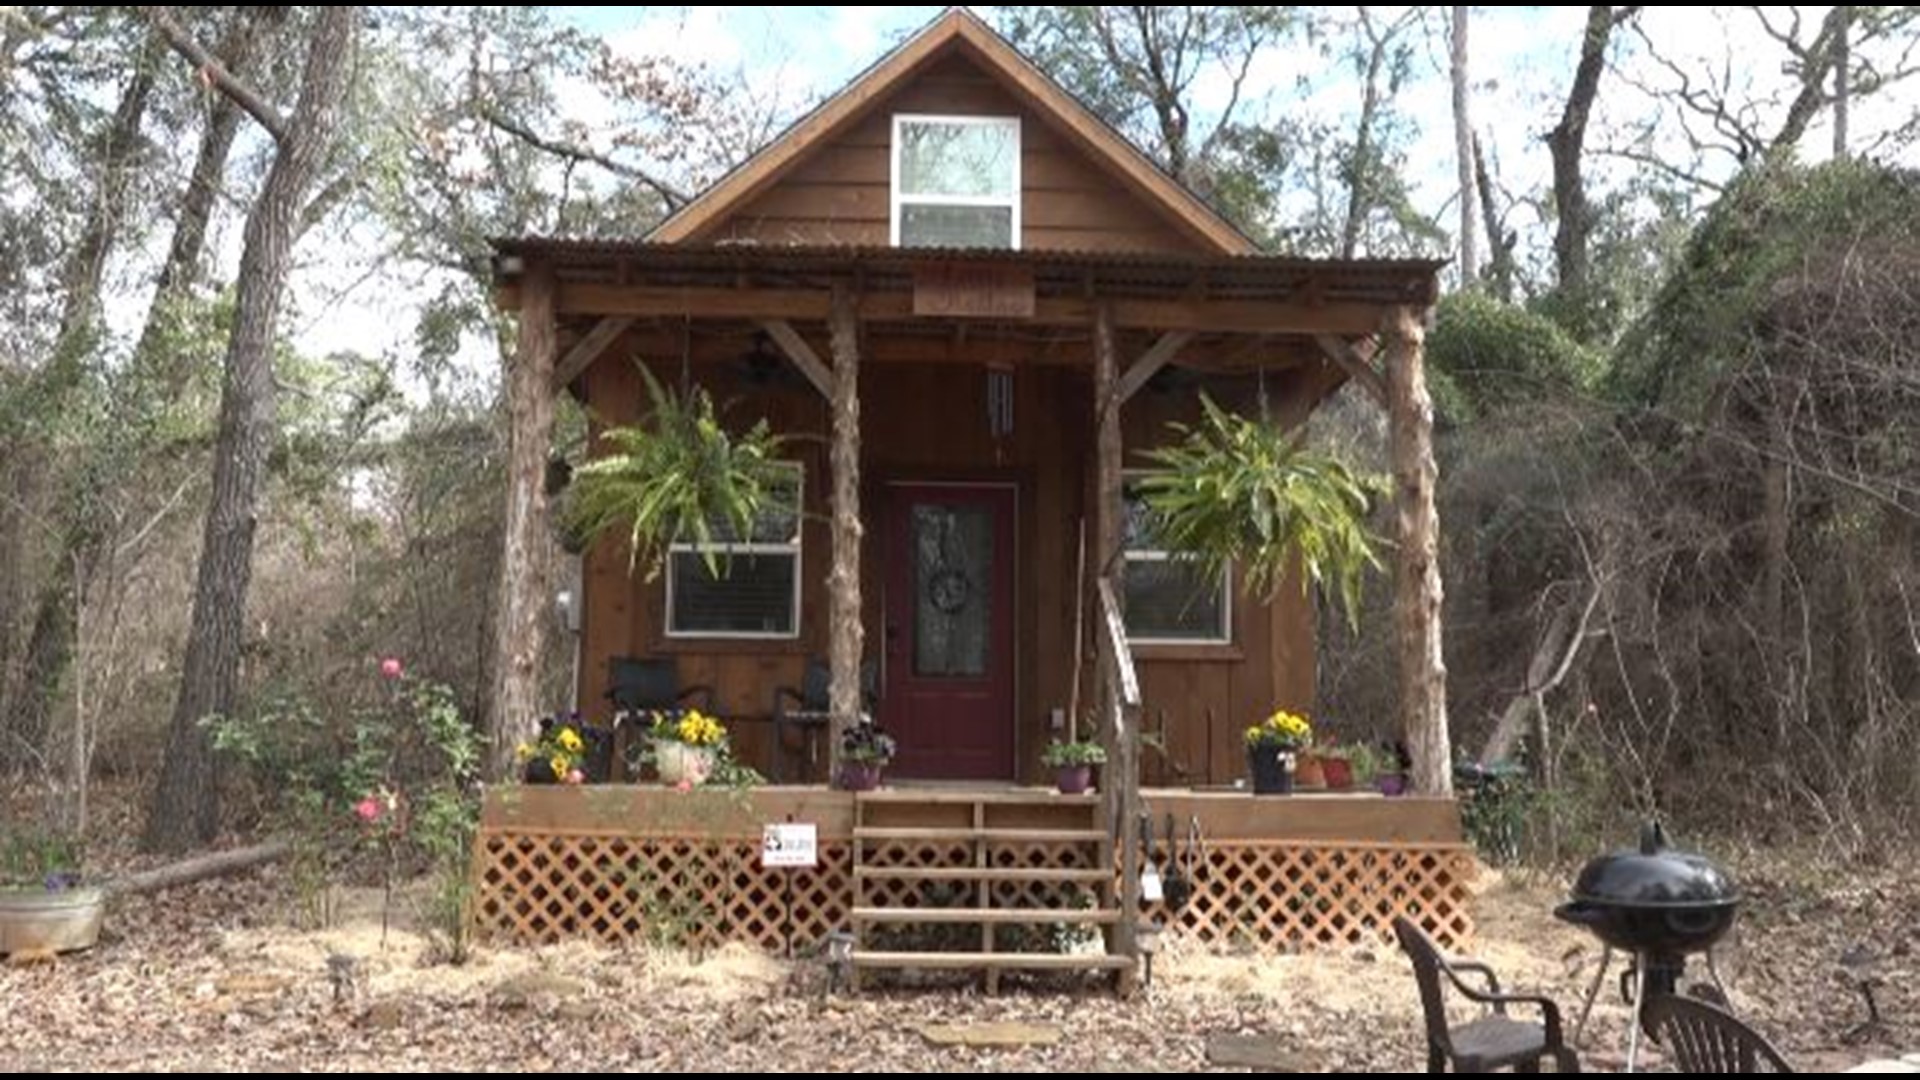 East Texans are turning to Airbnb to make a little extra cash. Hosts across Smith County racked up $700,000 but the most popular destination, is a small Flint cabin nestled in the woods by Lake Palestine.